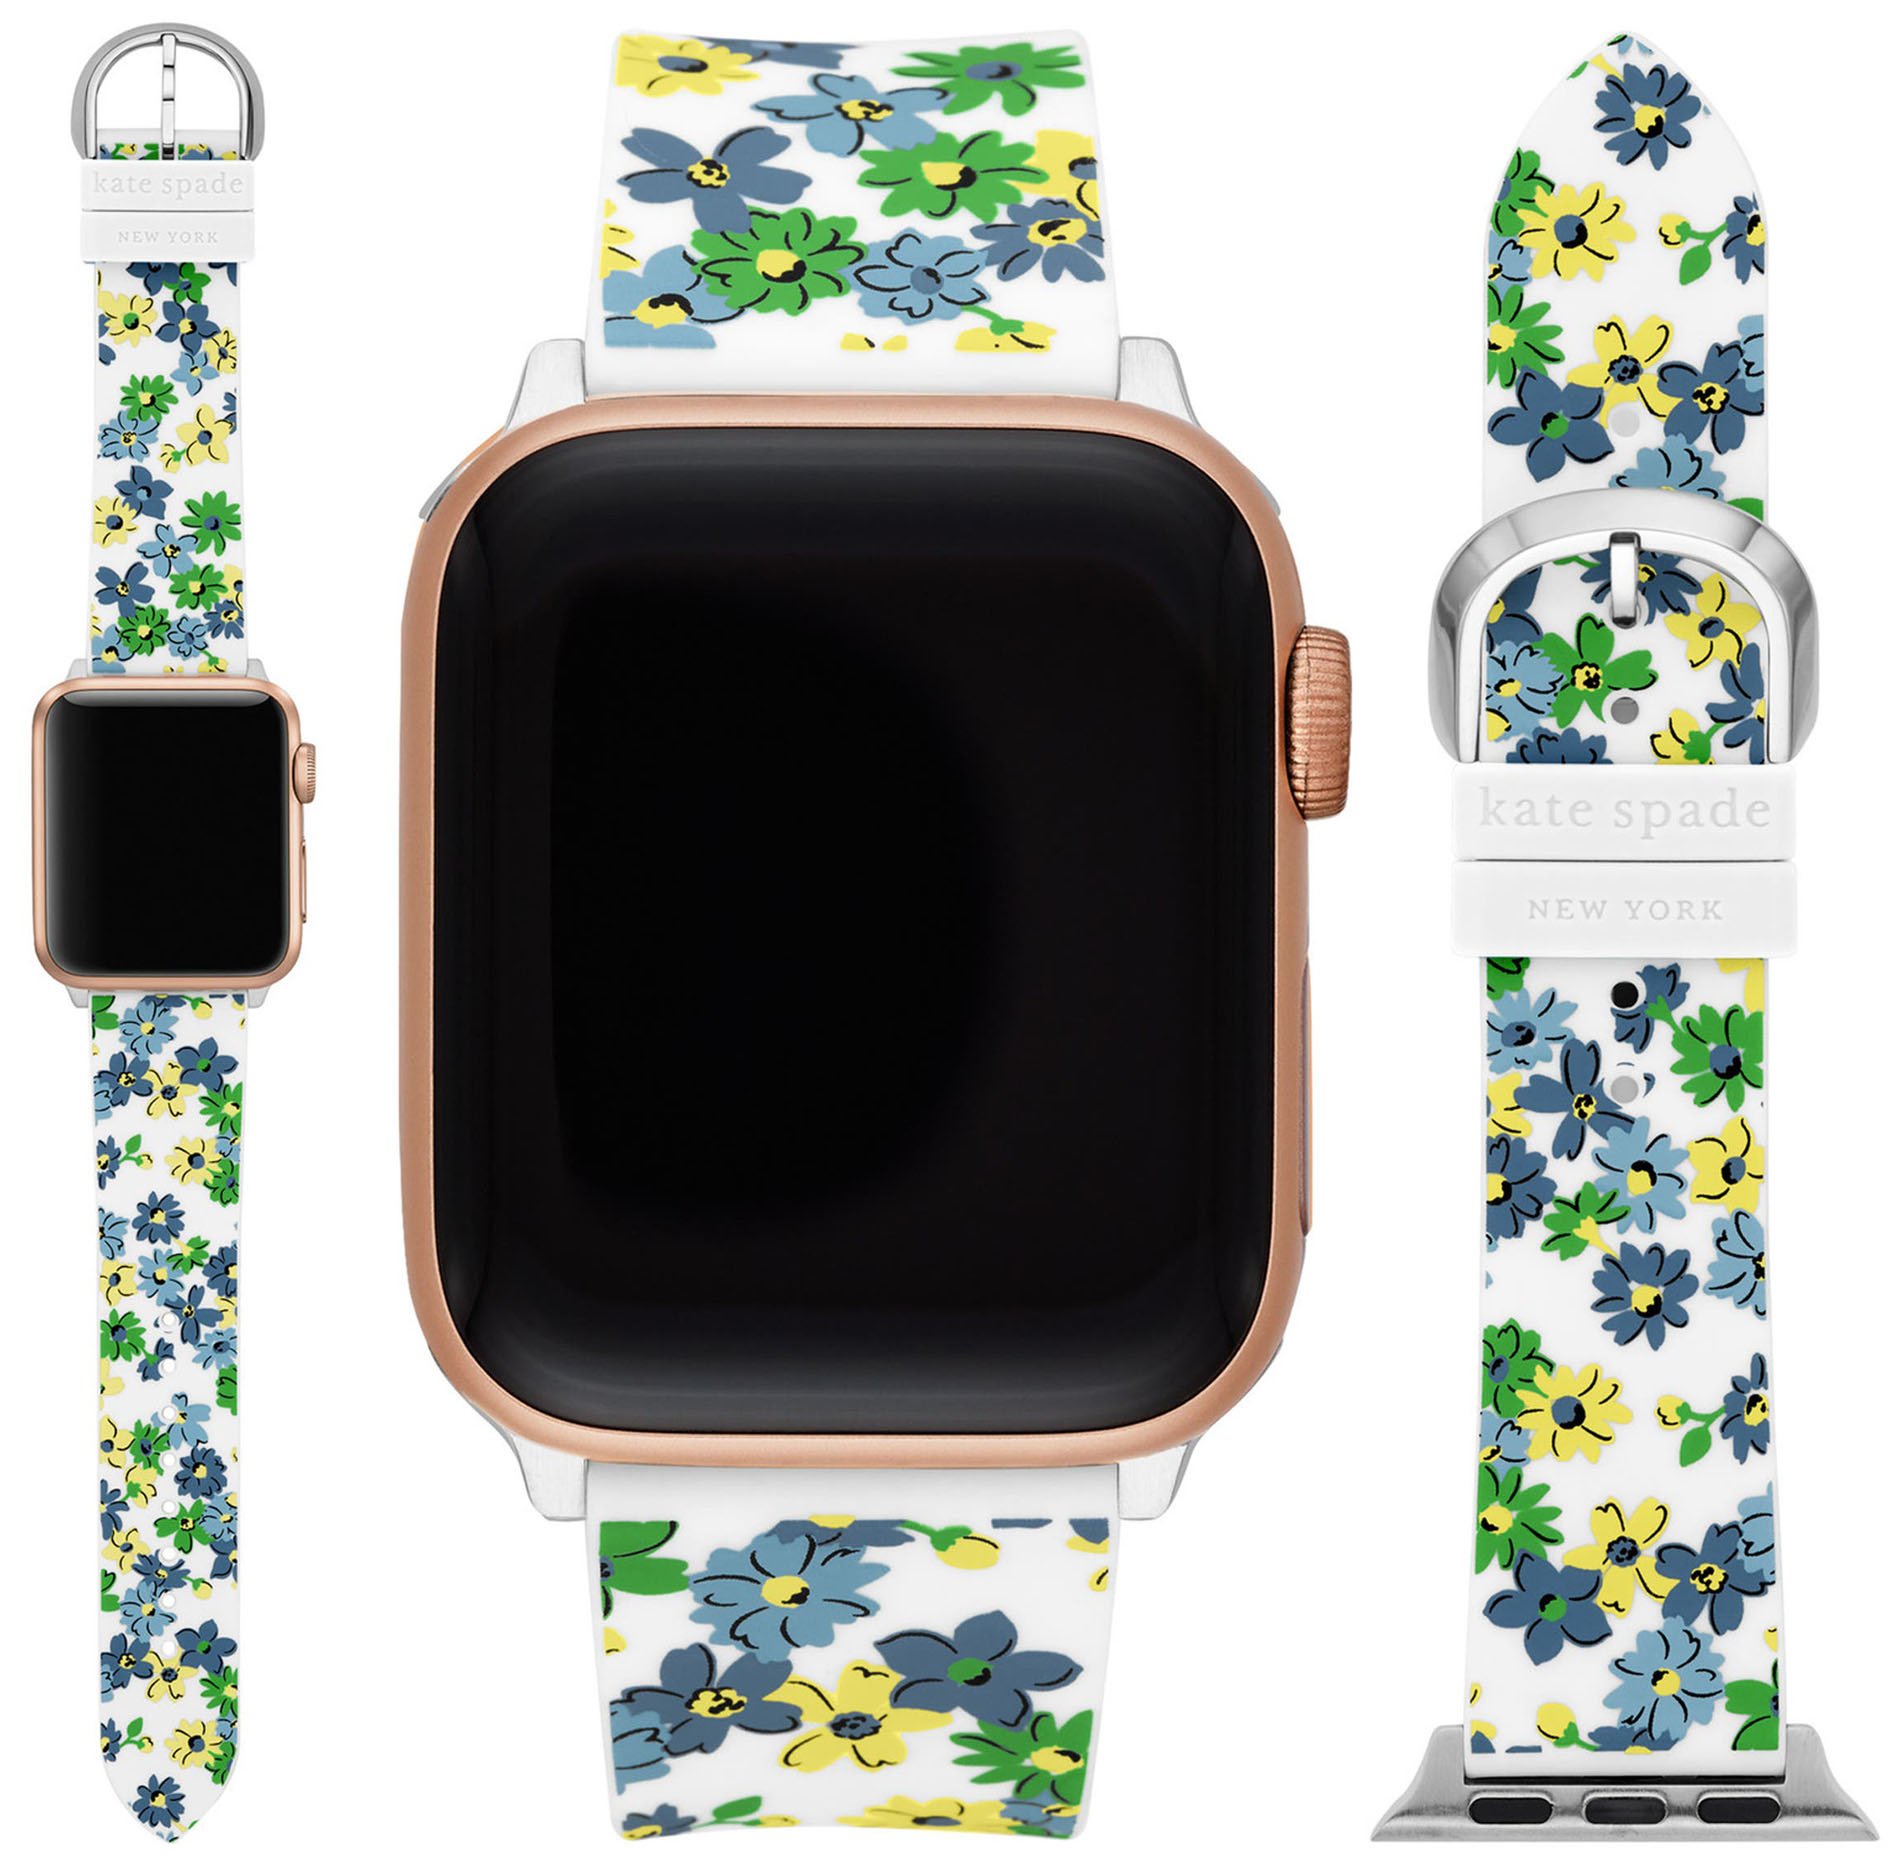 Kate Spade's Apple Watch floral band will give any outfit a vibrant and feminine finish